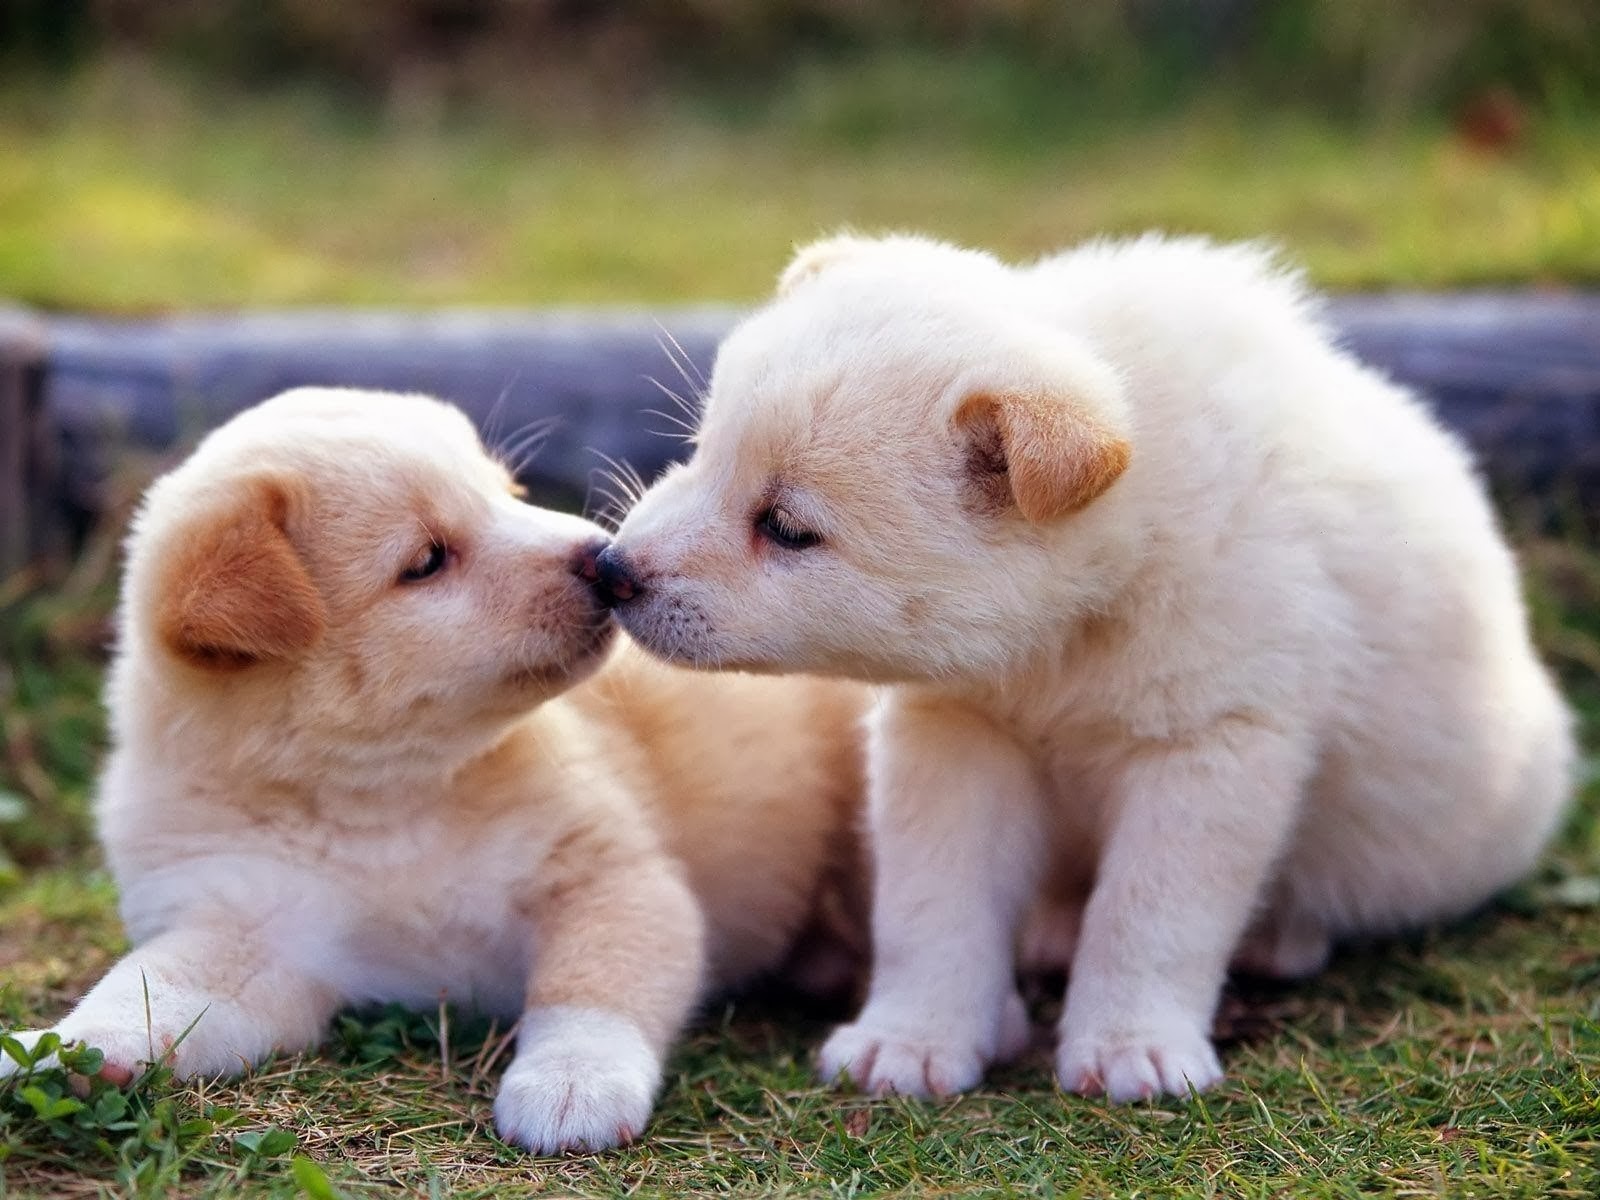 Kiss Day Images Hd - Cute Baby Animal , HD Wallpaper & Backgrounds